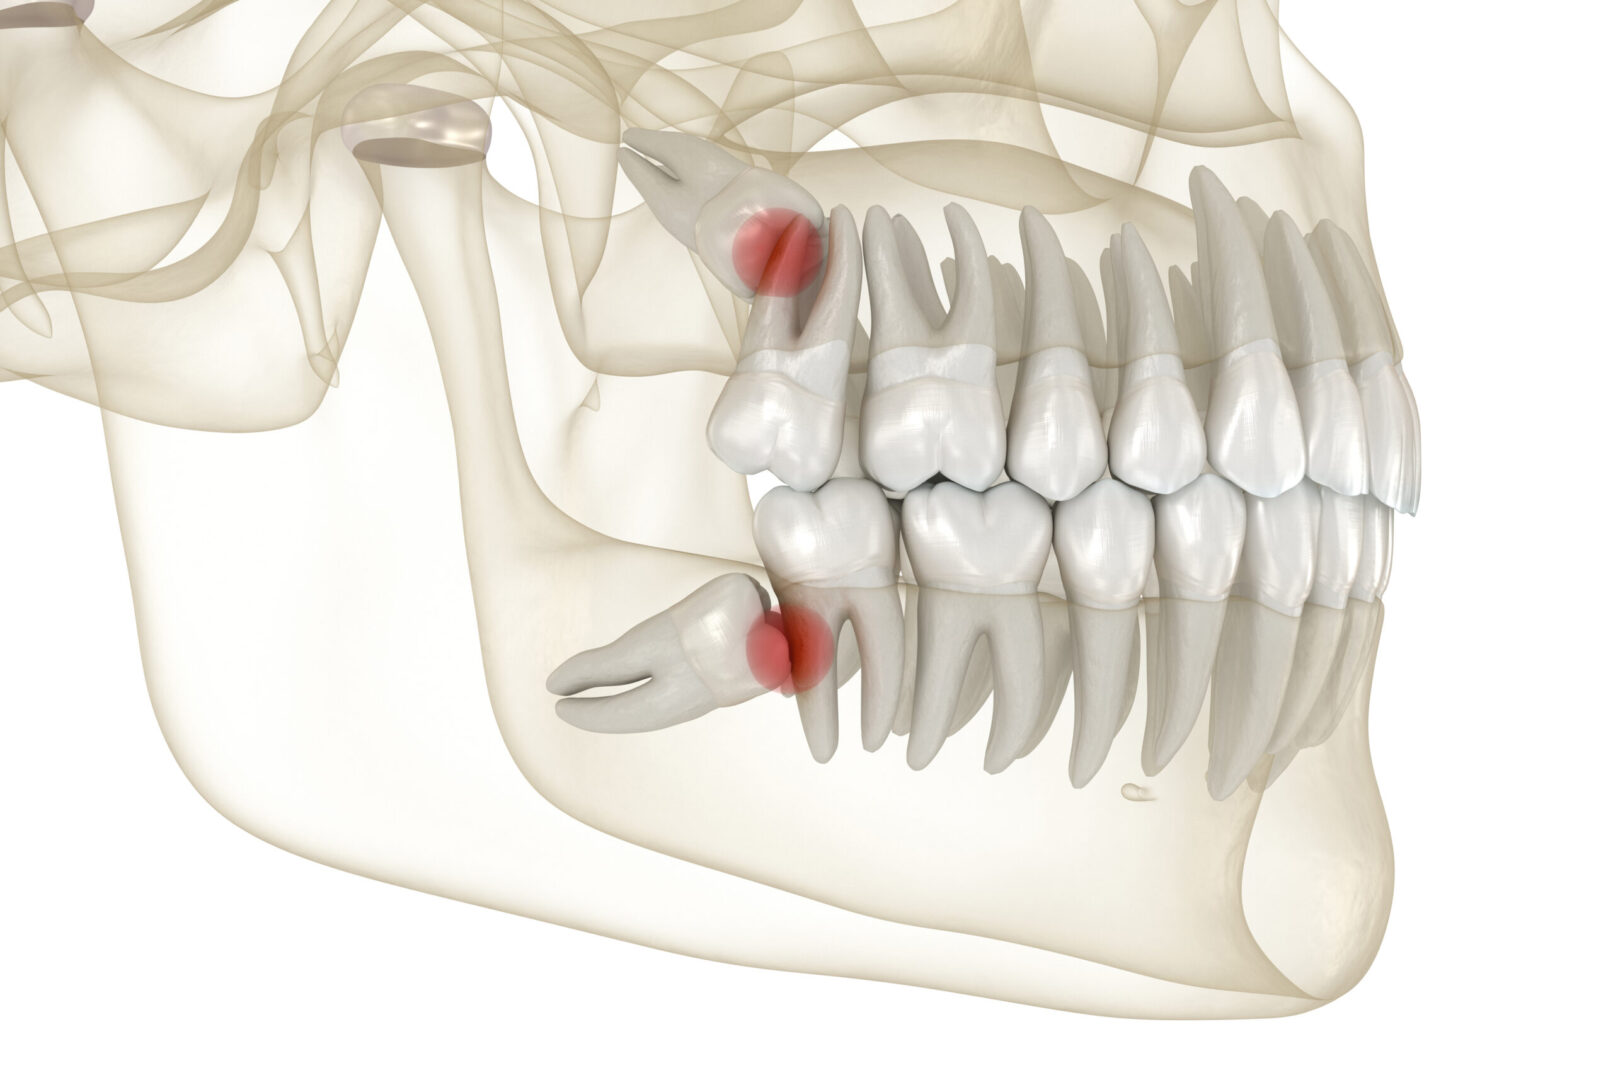 Mesial impaction of Wisdom teeth to the second molar needs extraction at Aspire Surgical in Utah.